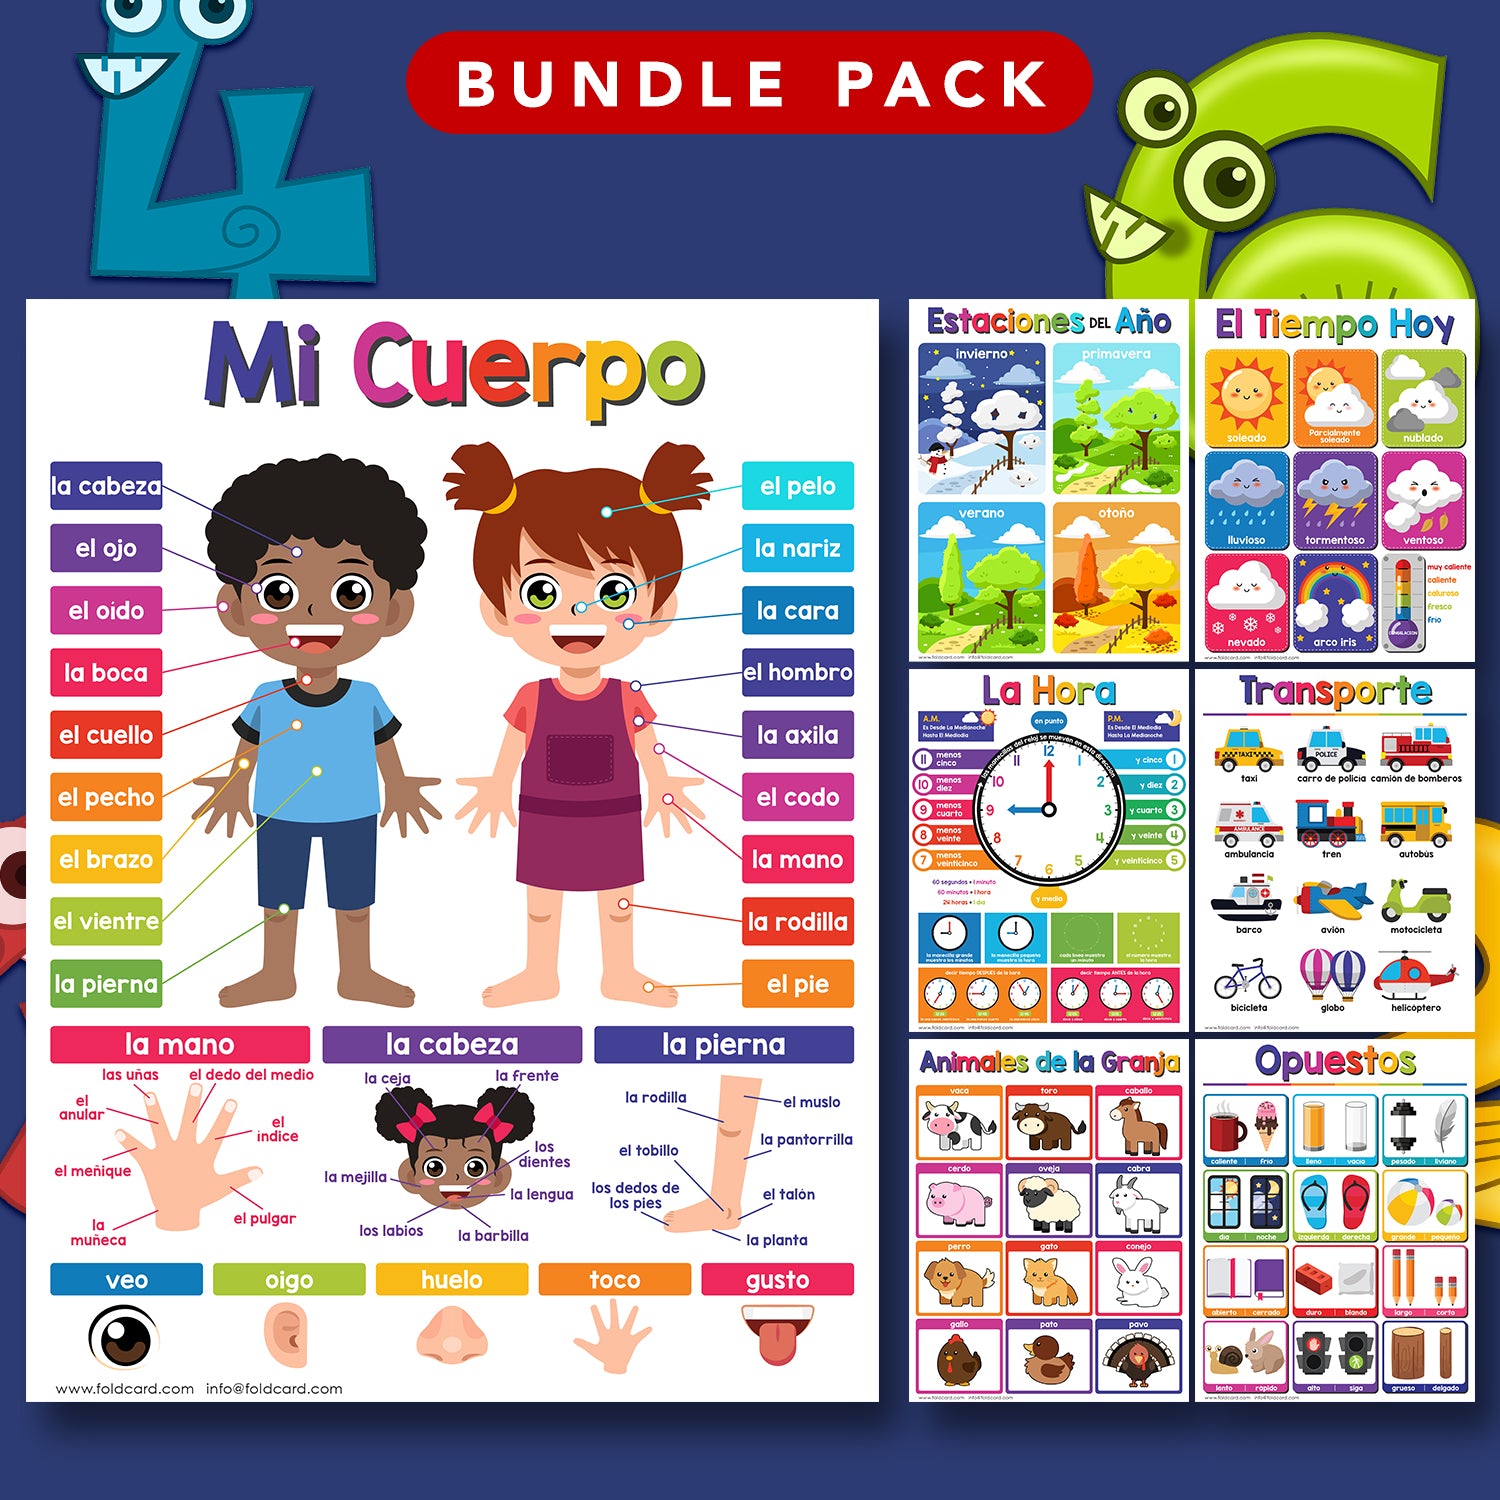 Spanish Chart Bundle - 14 Educational Posters for Kids